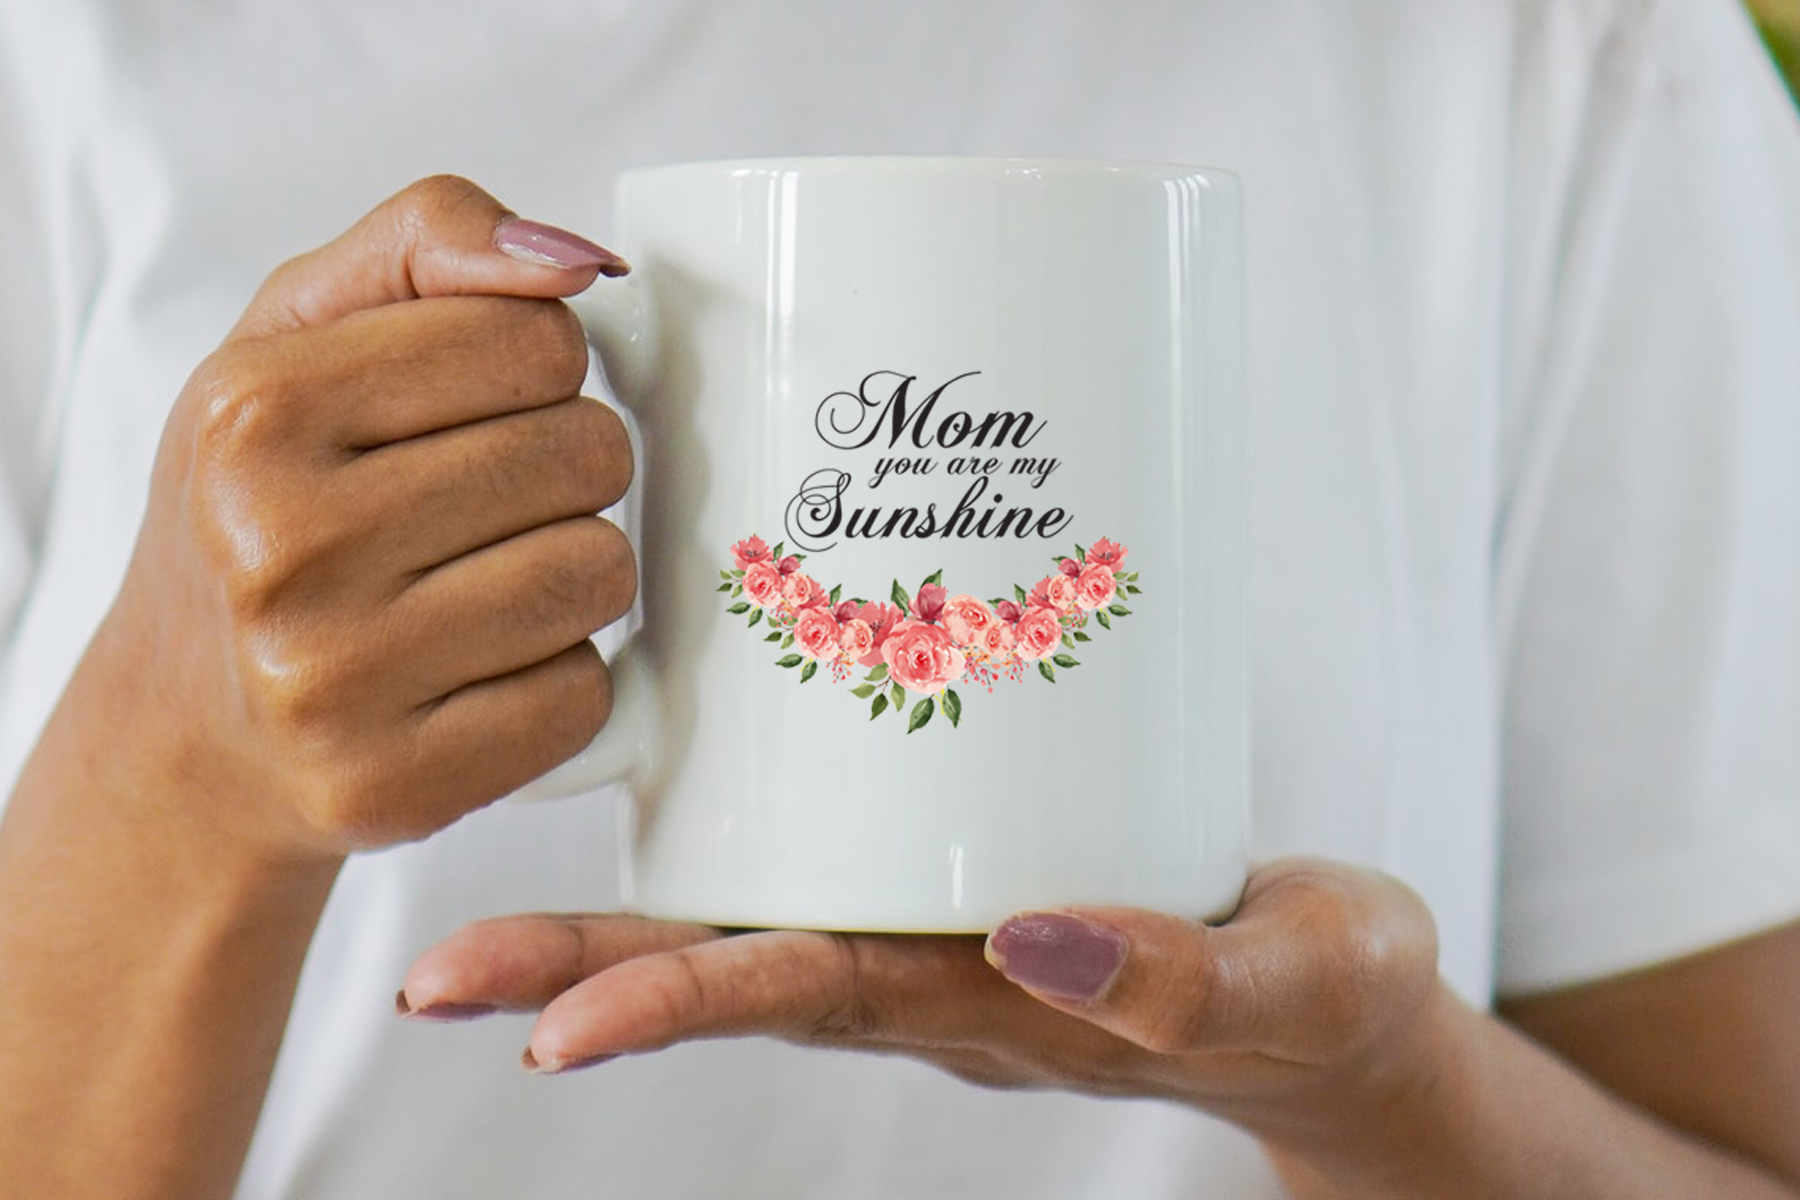 Woman holding a white coffee mug with pink flowers.